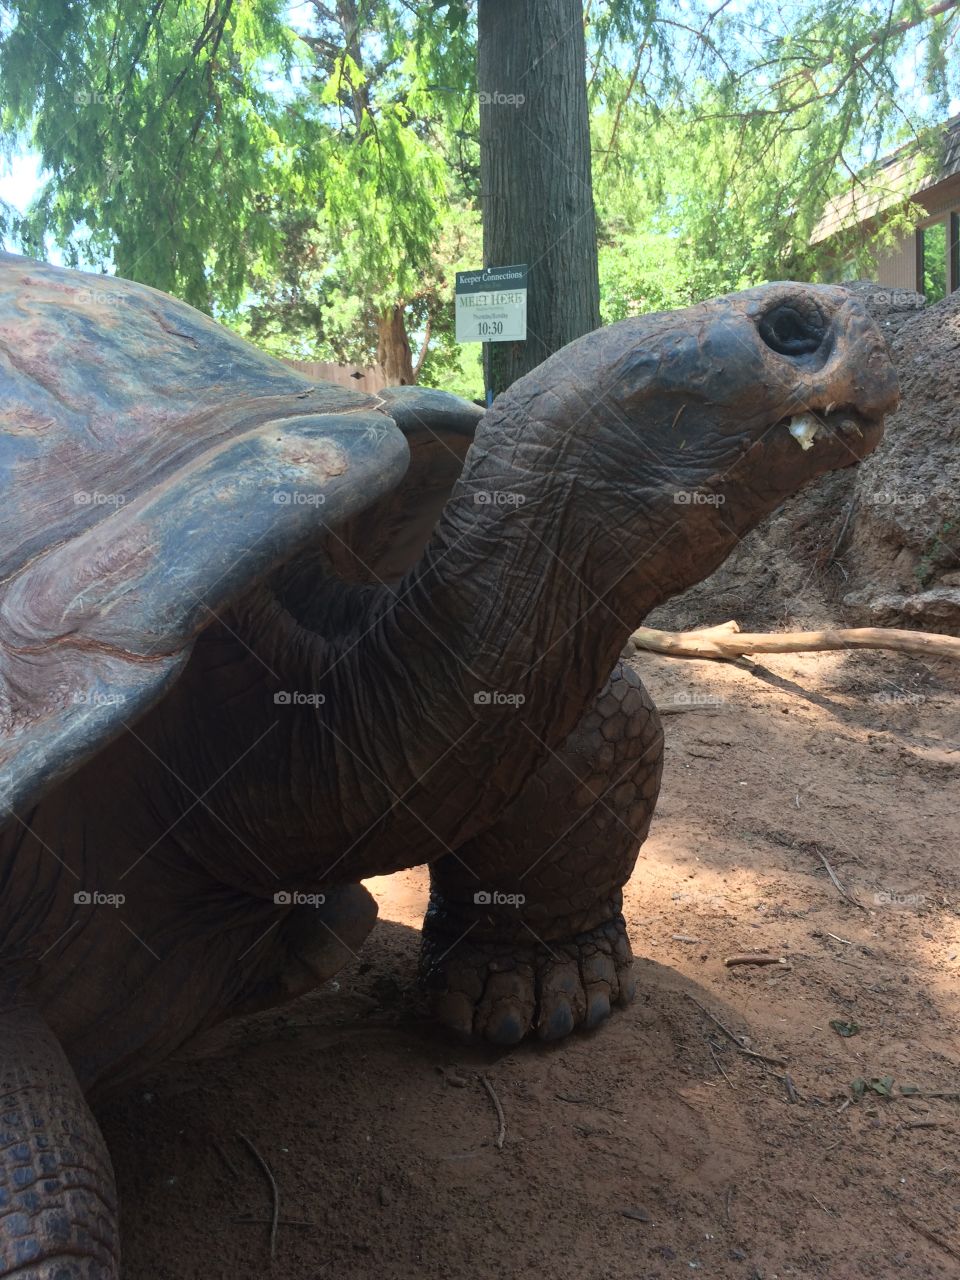 A tortoise at the zoo